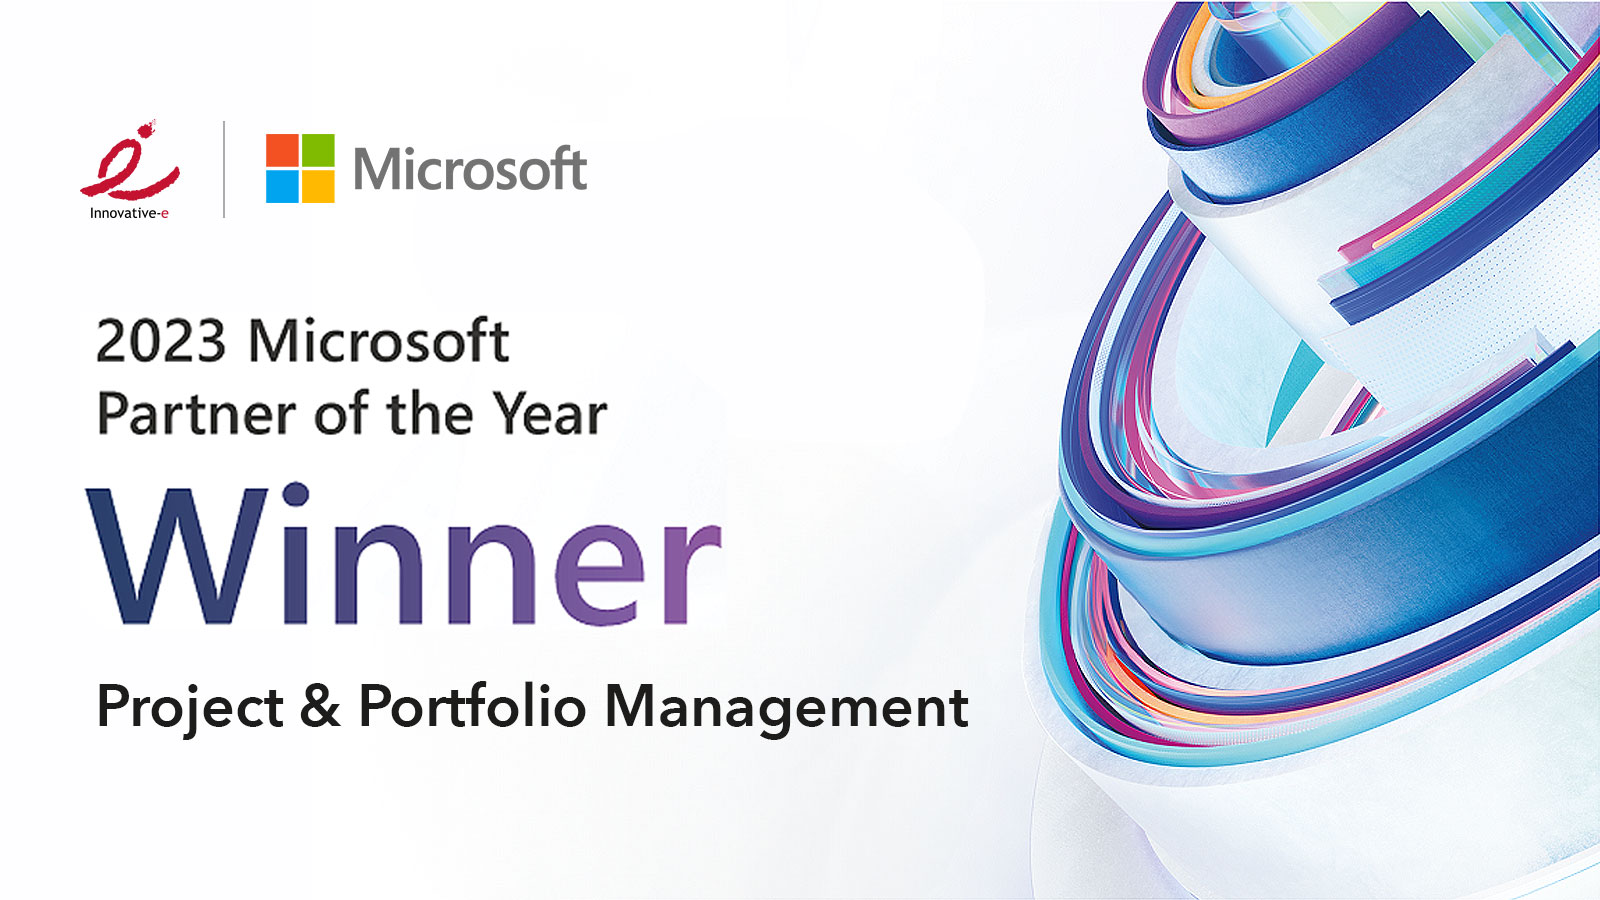 Microsoft Partner of the Year 2023